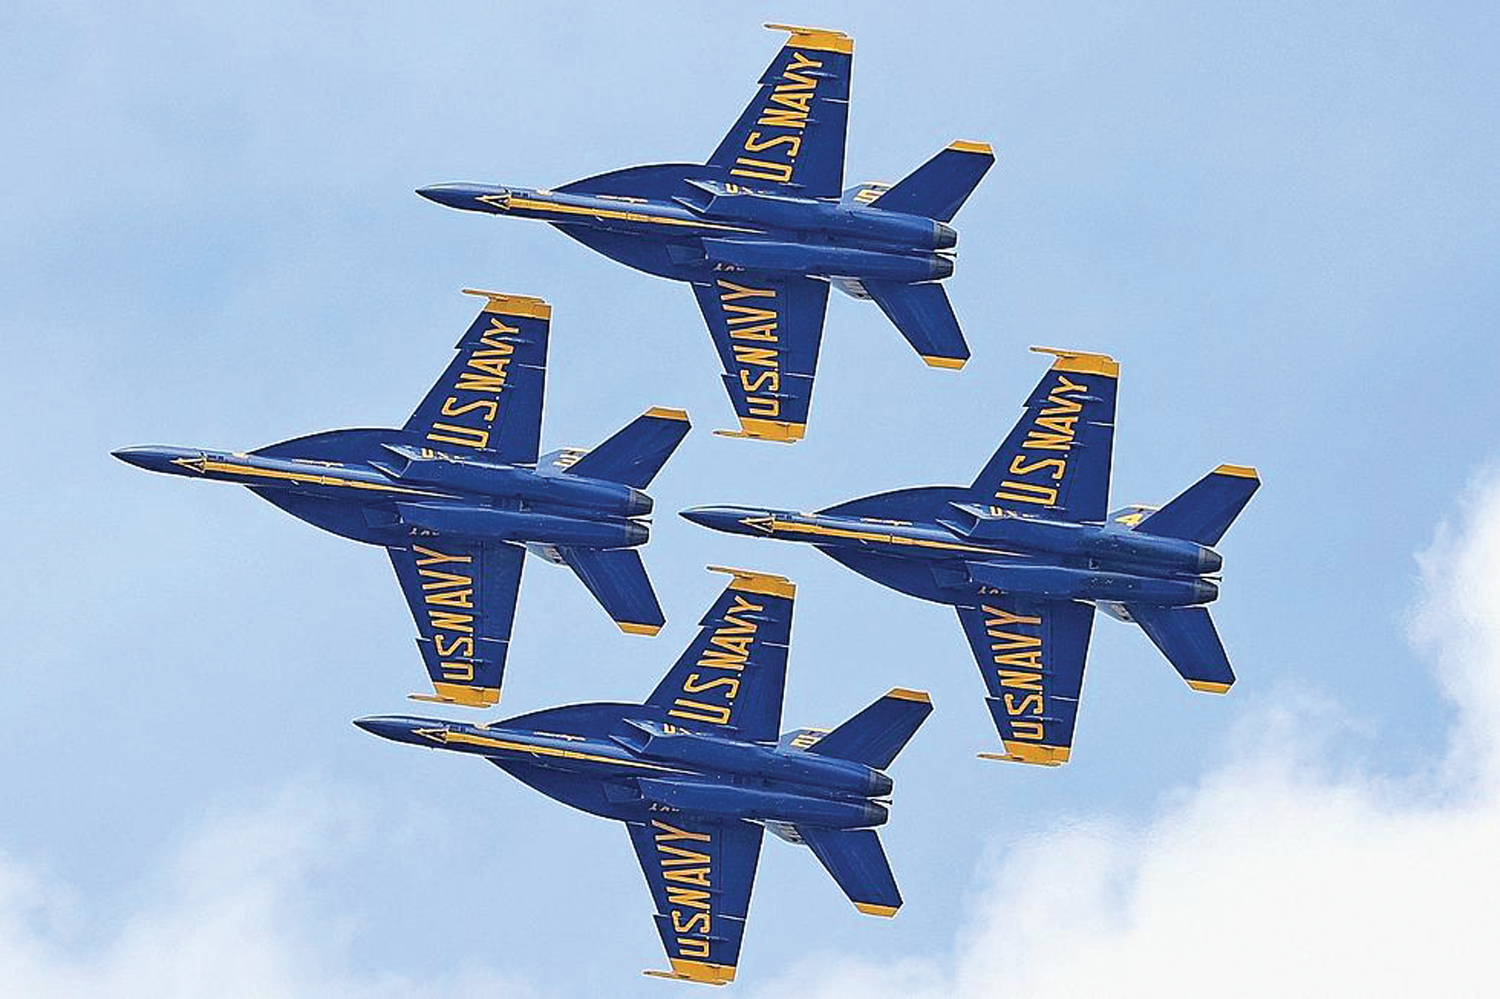 Blue Angels Airshow is ‘Hot” Event for Montana